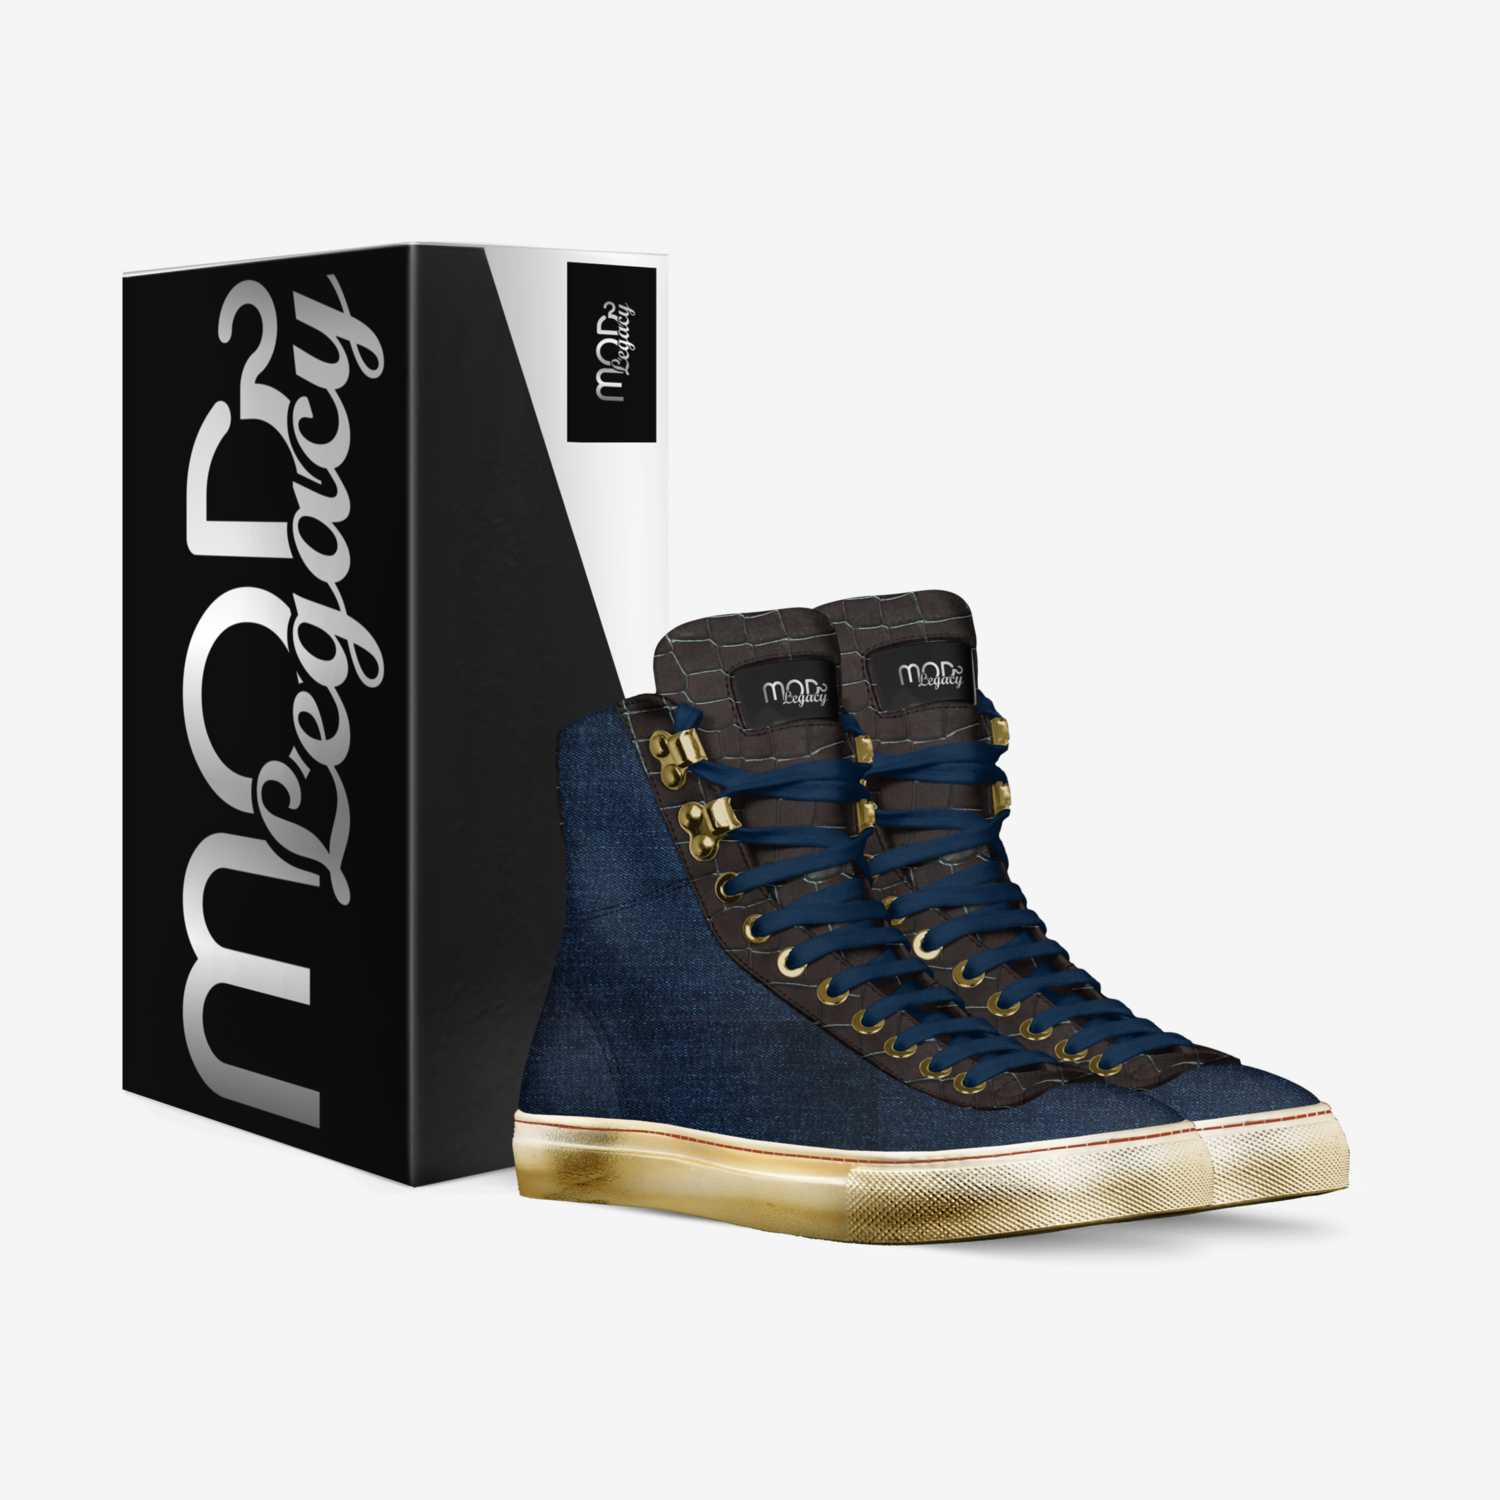 JT HIGH custom made in Italy shoes by Blake Alexandros | Box view